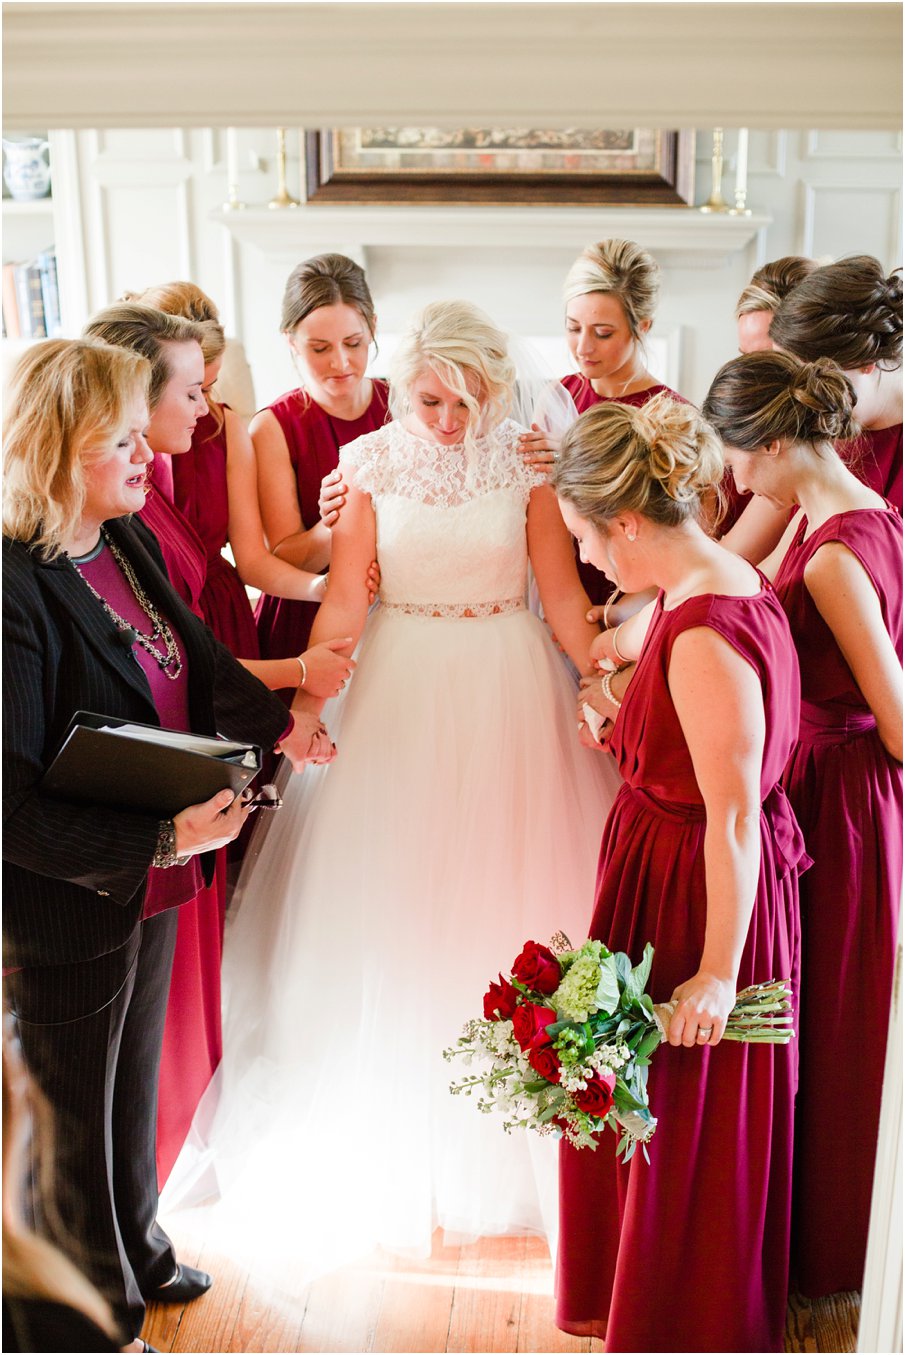 bride-praying-with-bridesmaids-before-wedding-ceremony-at-vintager-inn-new-kent-virginia